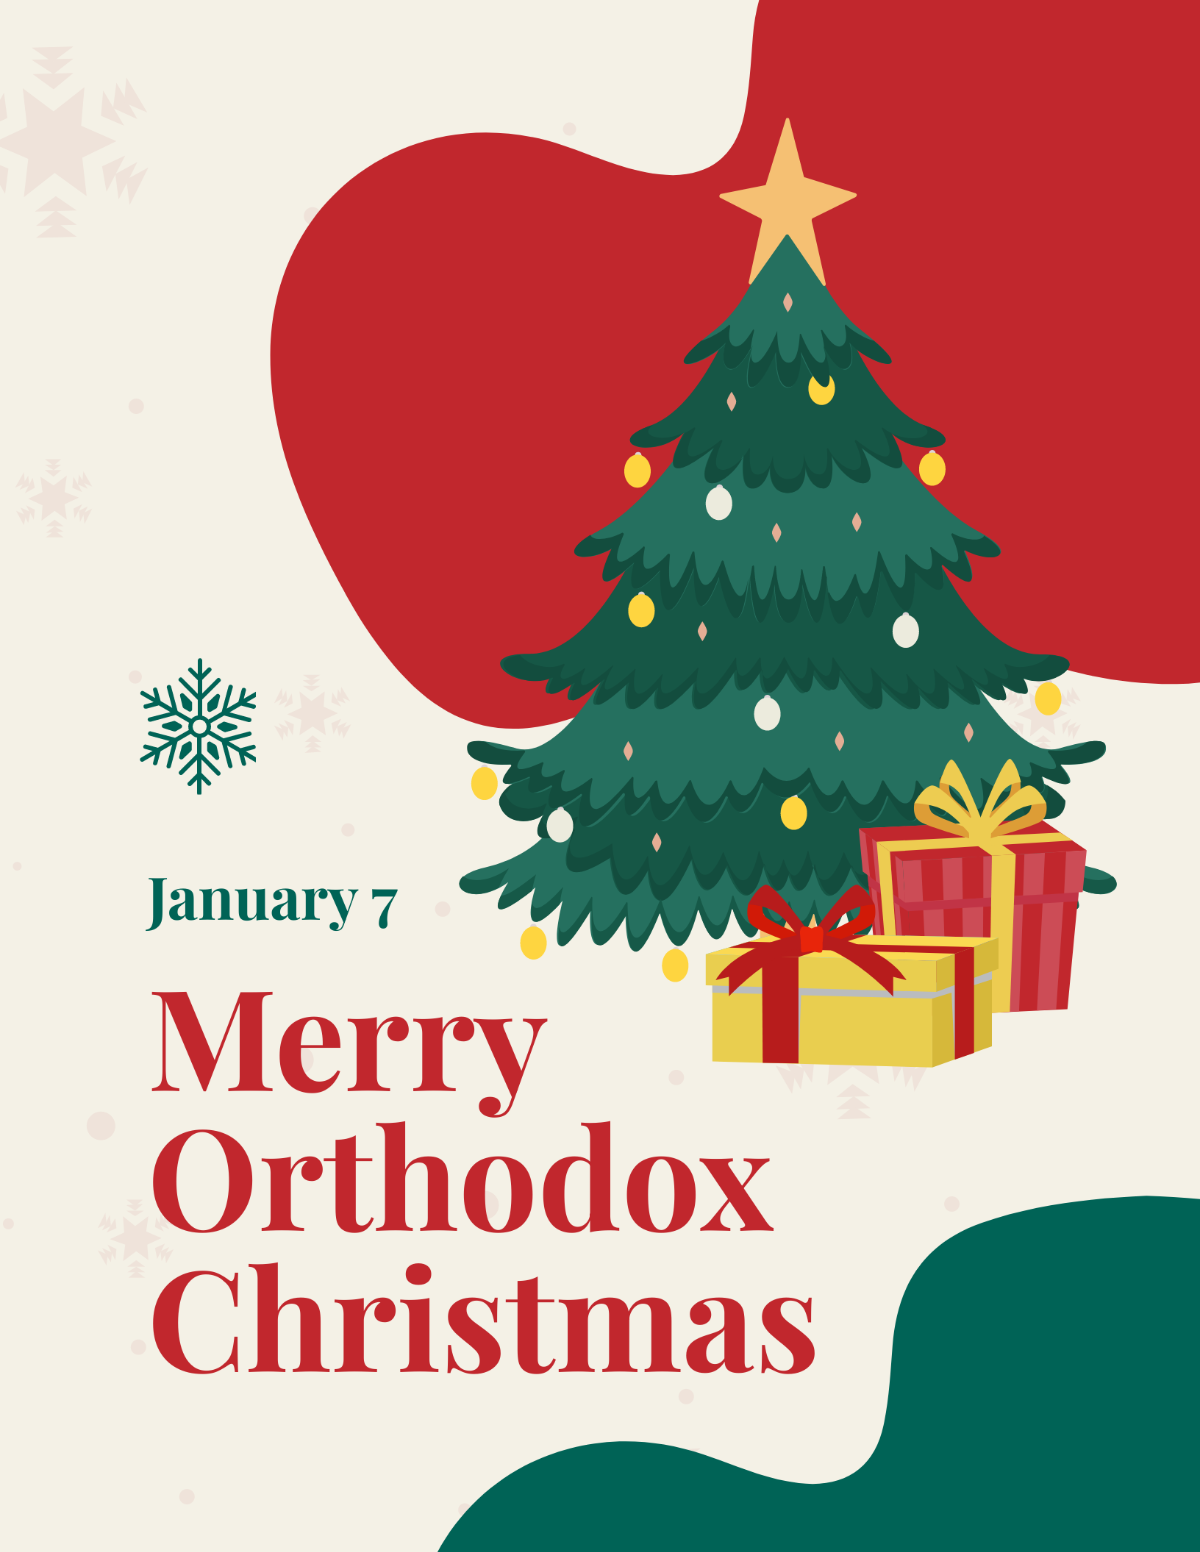 Free Merry Orthodox Christmas Flyer Template